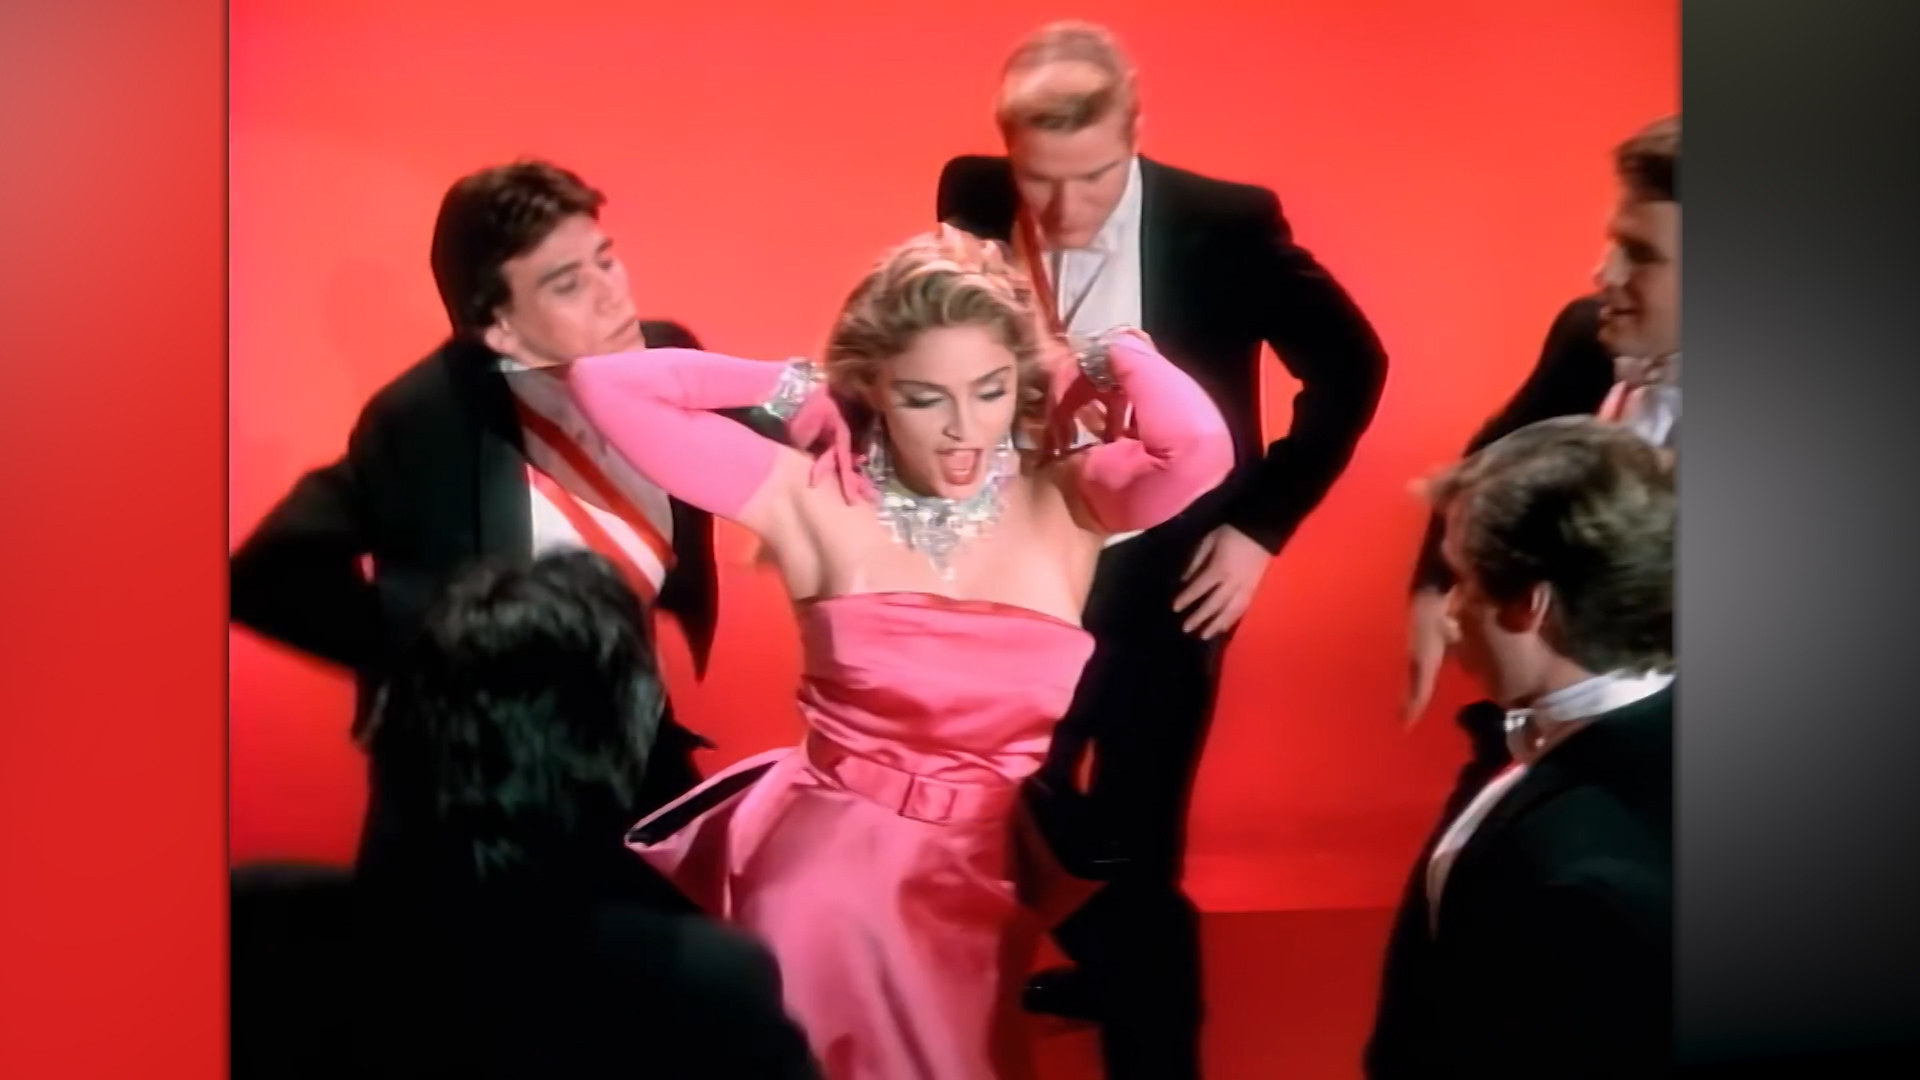 Video: Madonna's 'Material Girl' dress, inspired by Marilyn Monroe